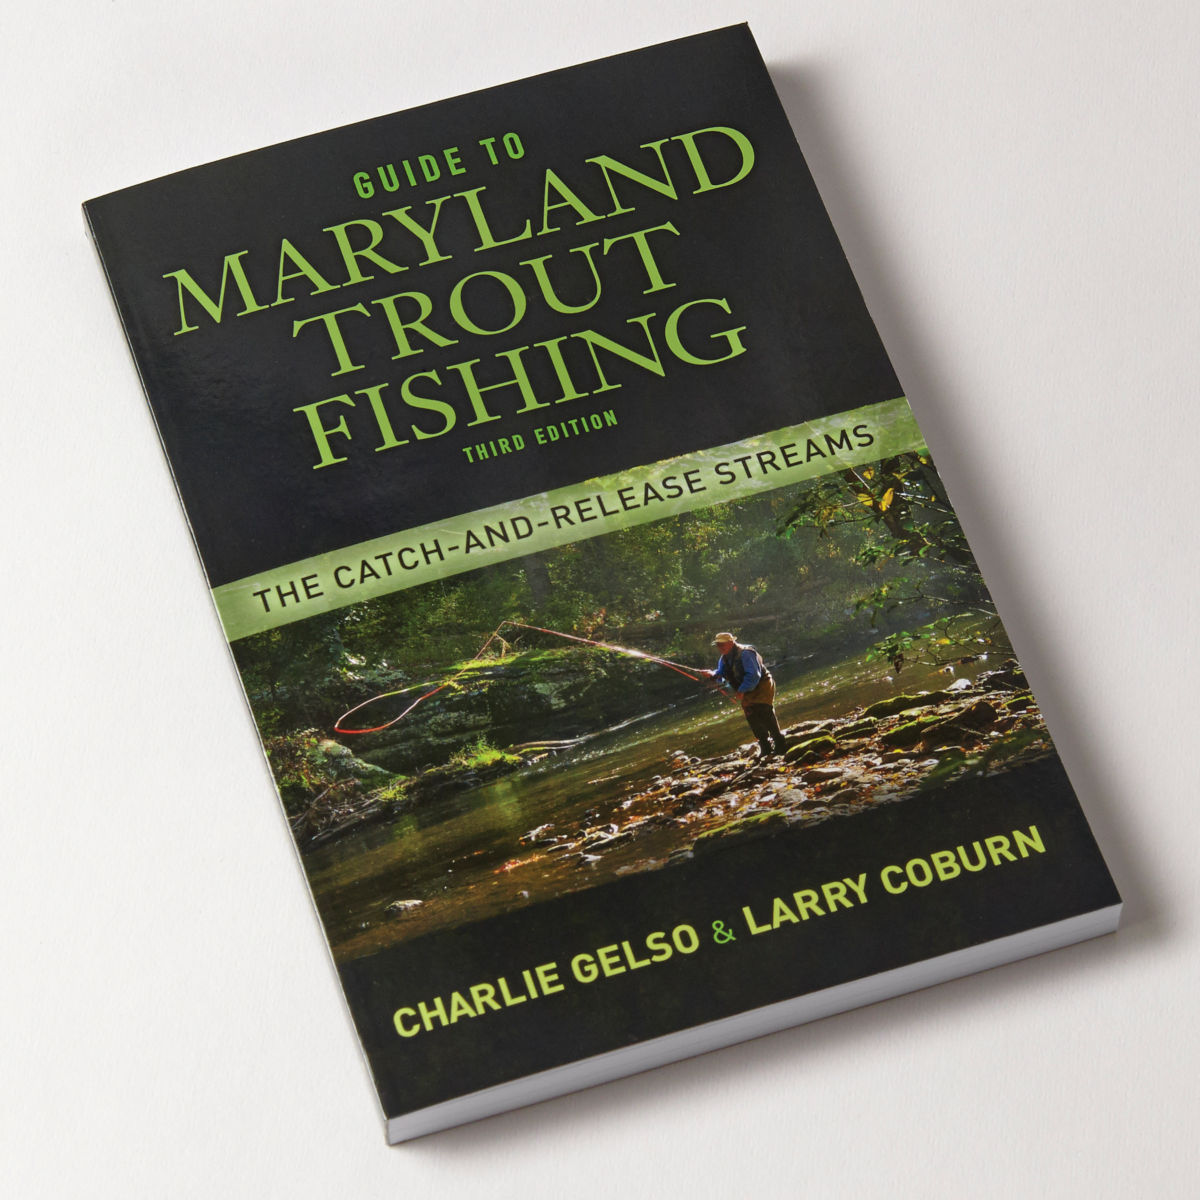 Guide to Maryland Trout Fishing  The Catch and Release Streams 